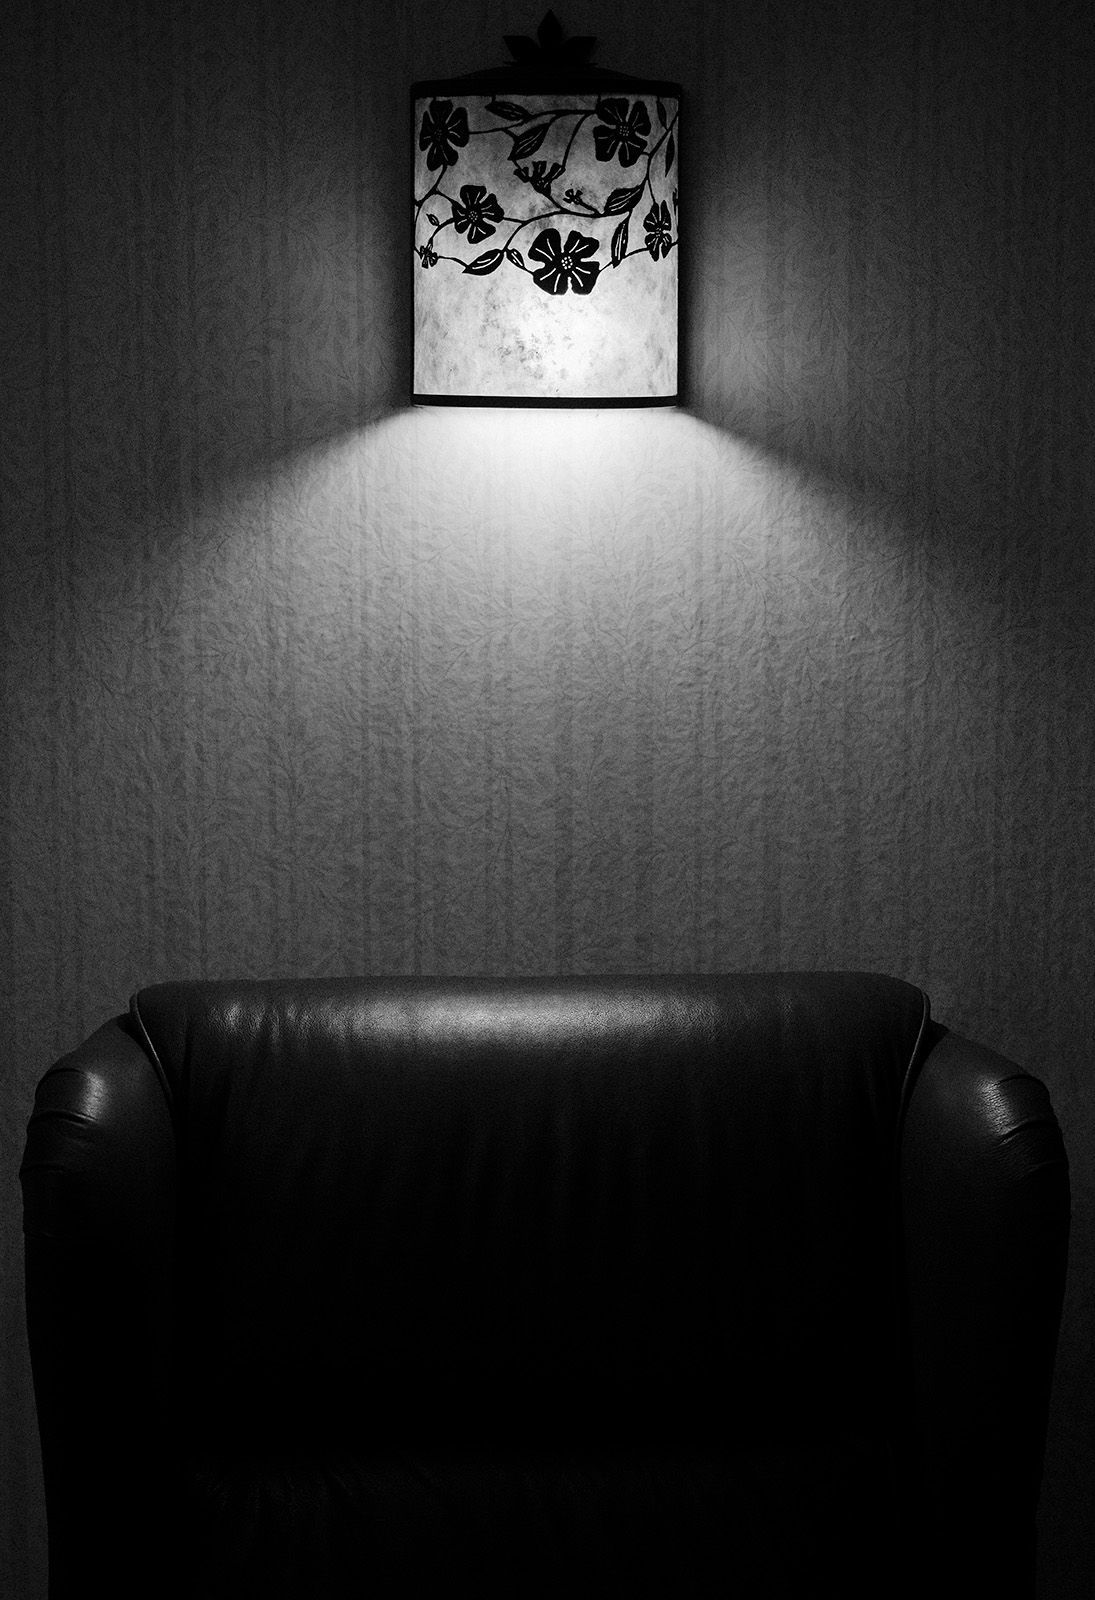 A dark chair waits in silence under the beautiful light at Rim Rock Resort Hotel.